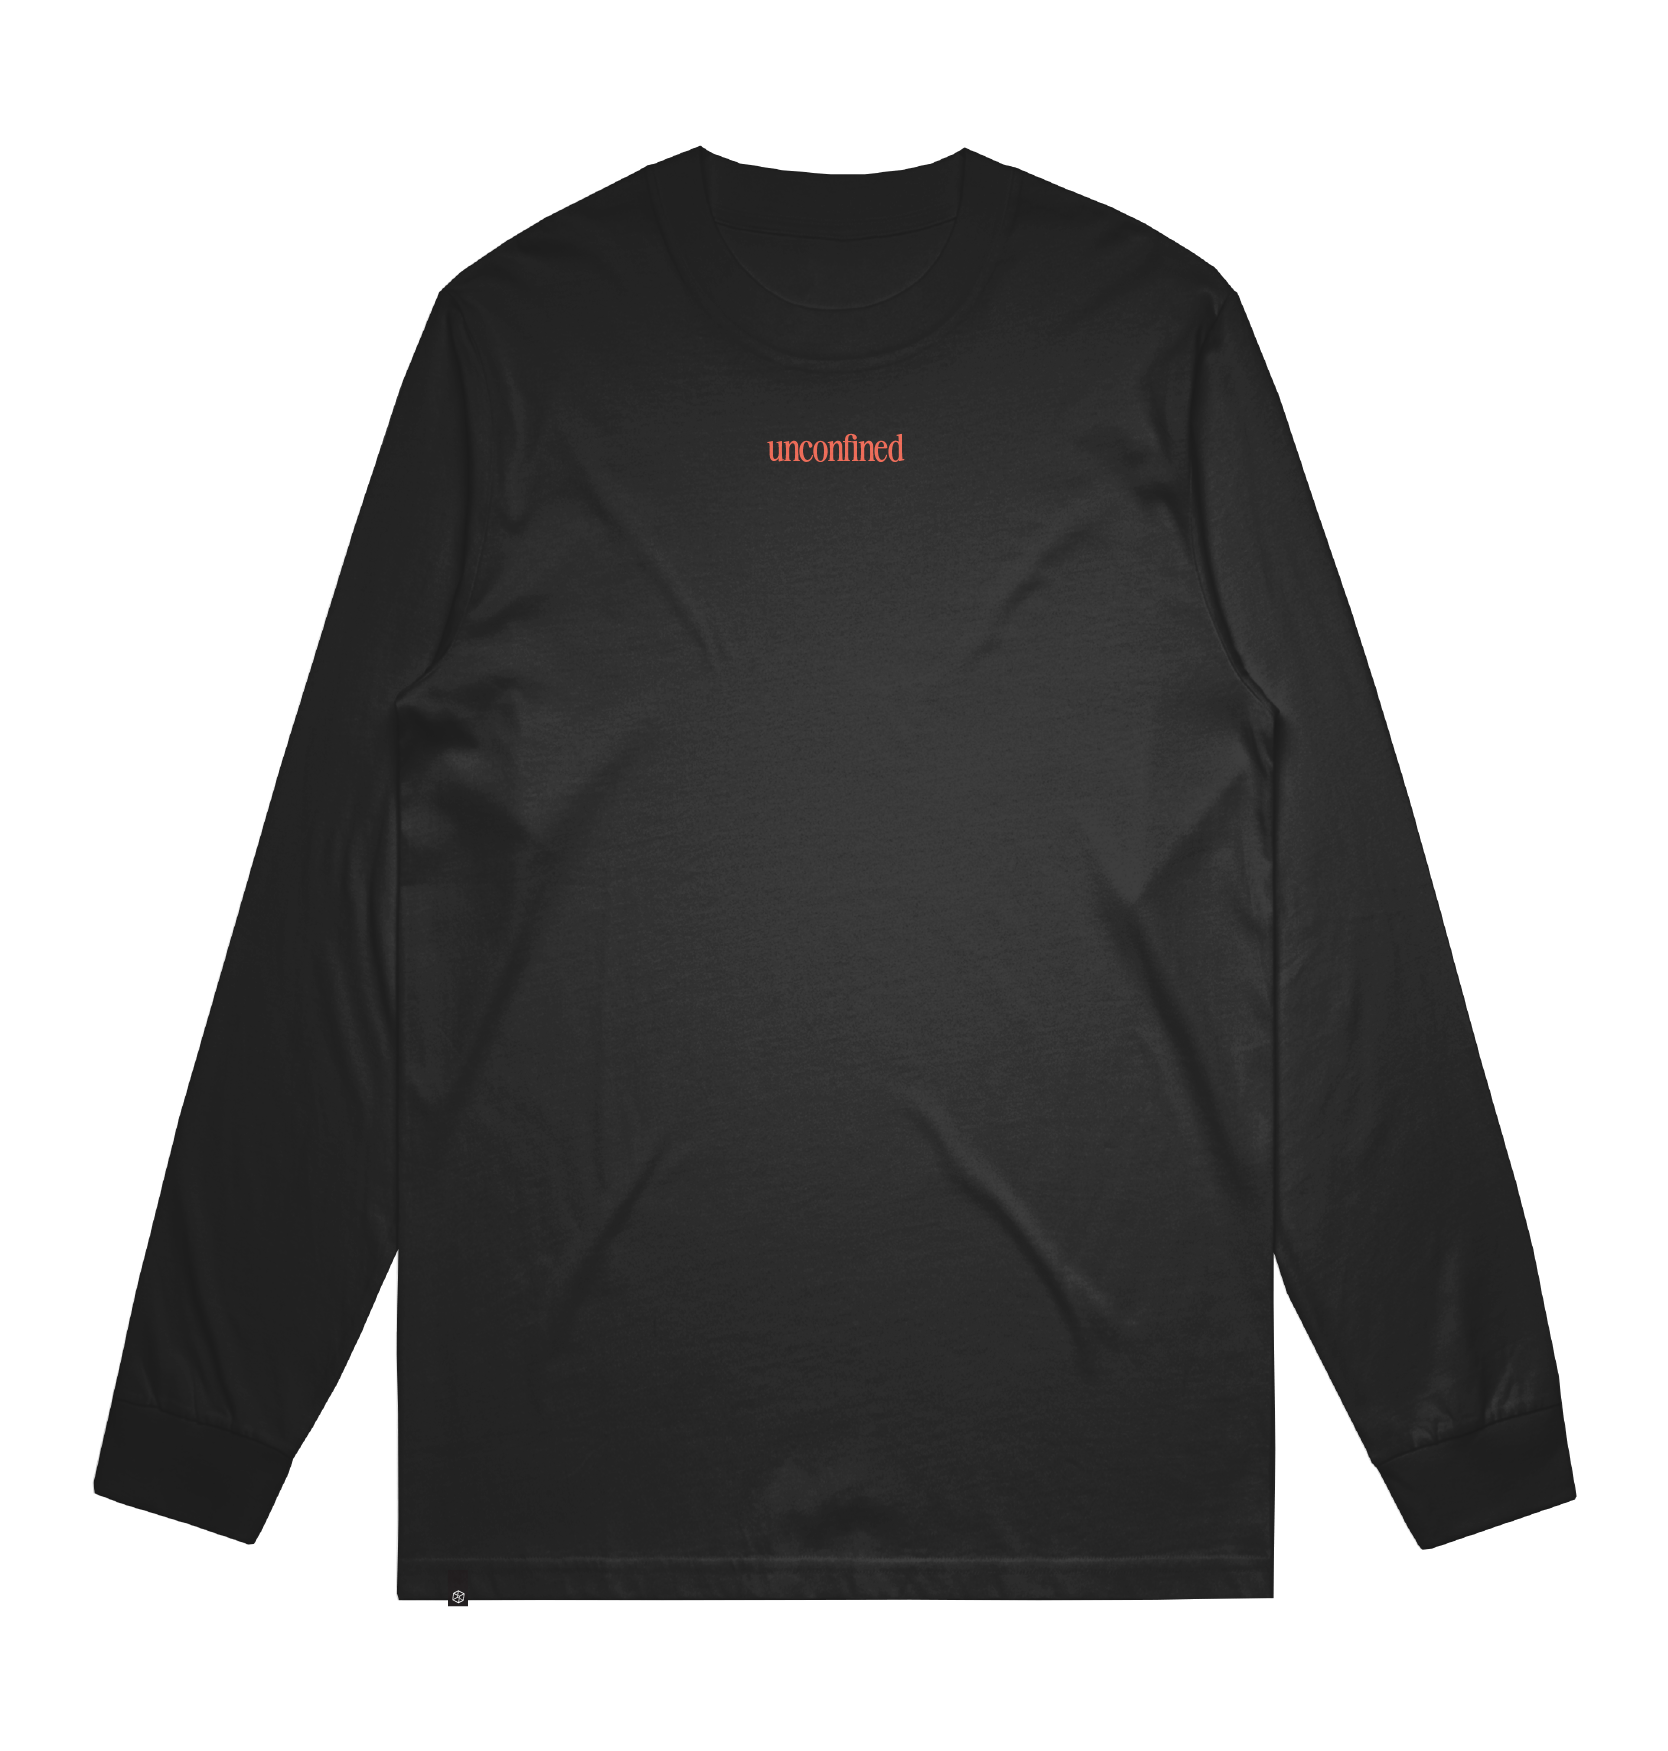 Different View Graphic Long Sleeve T-Shirt